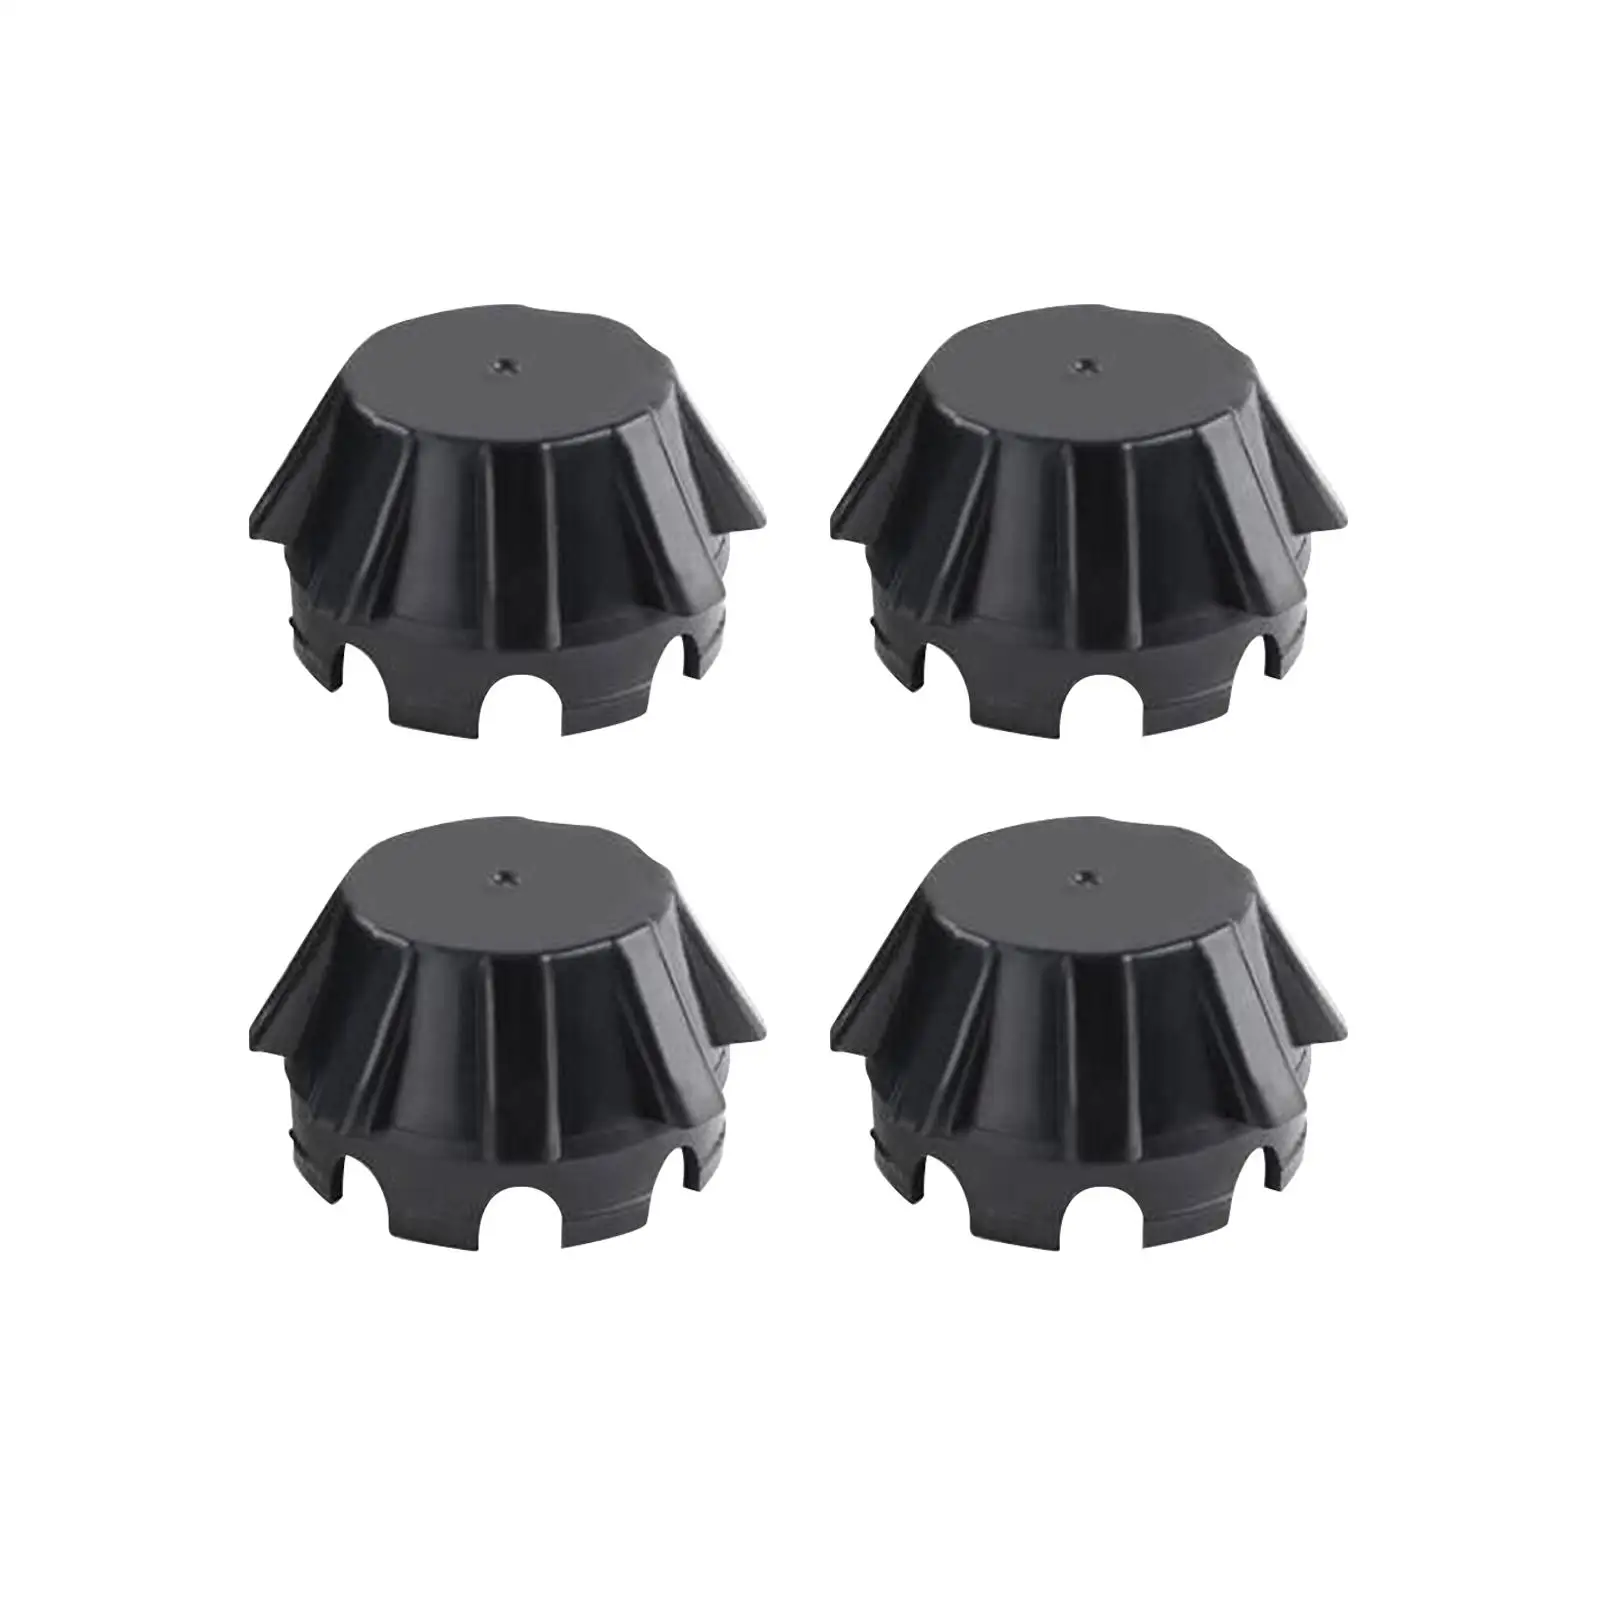 4 Pieces Tire Wheel Hub Caps 11065-1341 Repair Parts Easy Installation Assembly Replace for Kawasaki Teryx Krx 1000